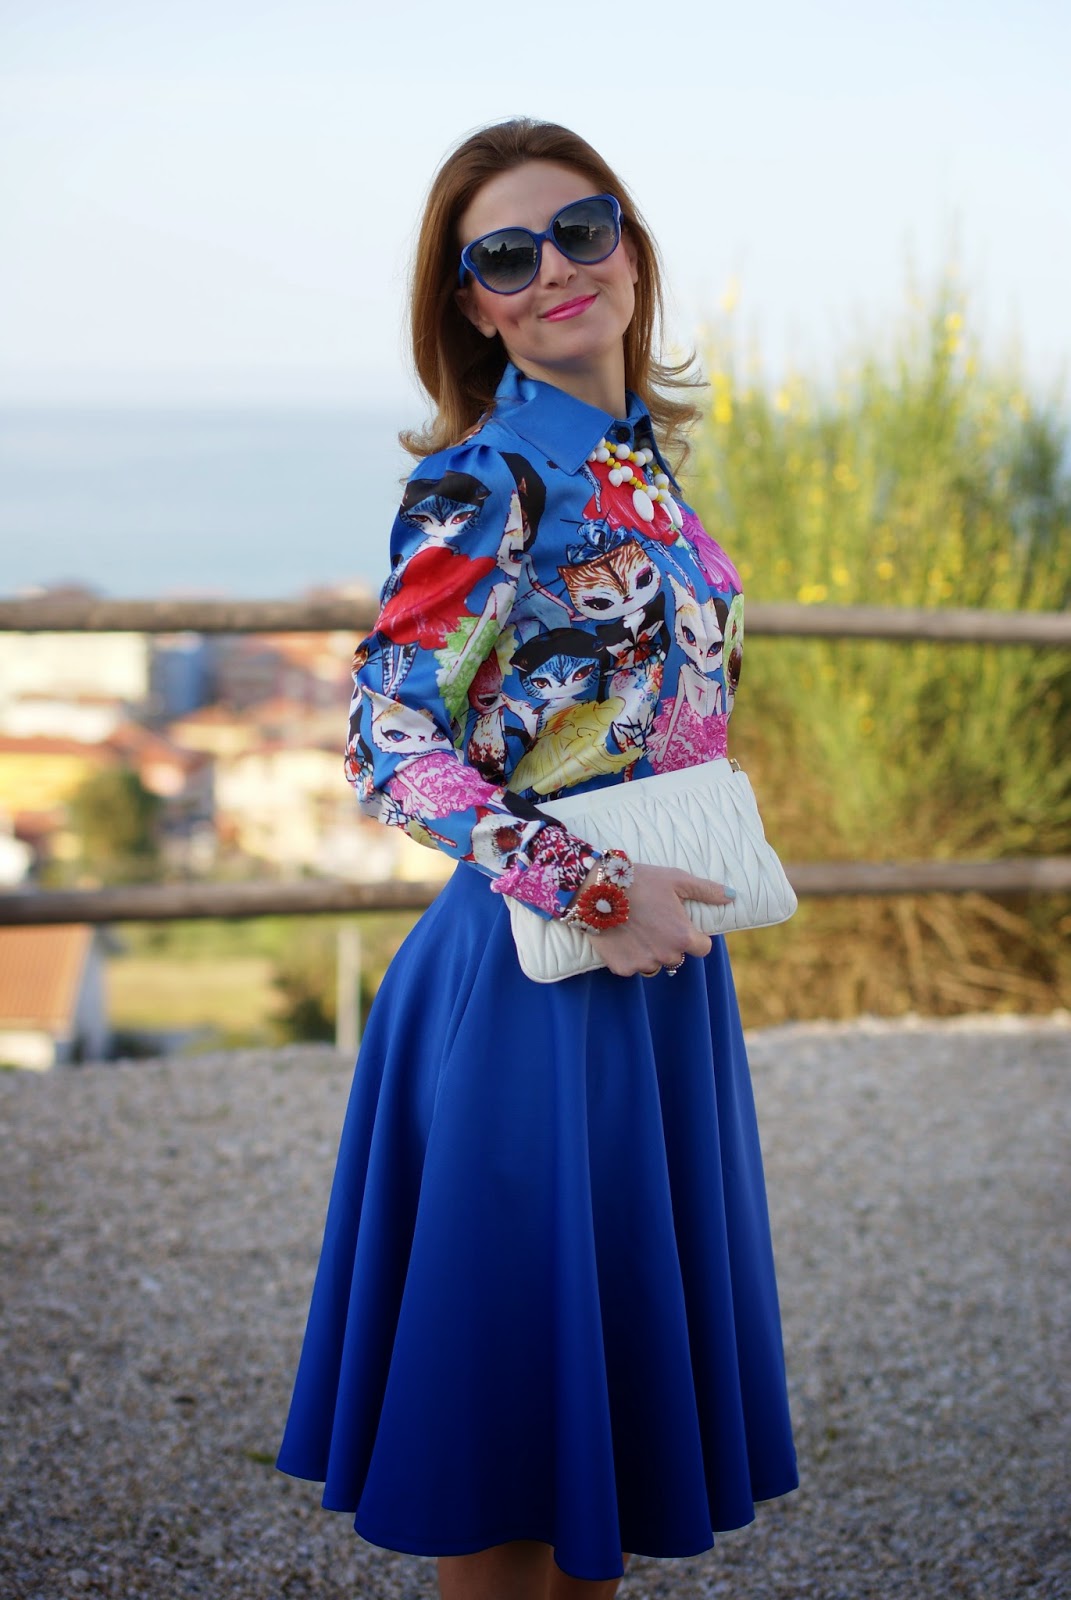 Cats print shirt, full skirt | Fashion and Cookies - fashion and beauty ...